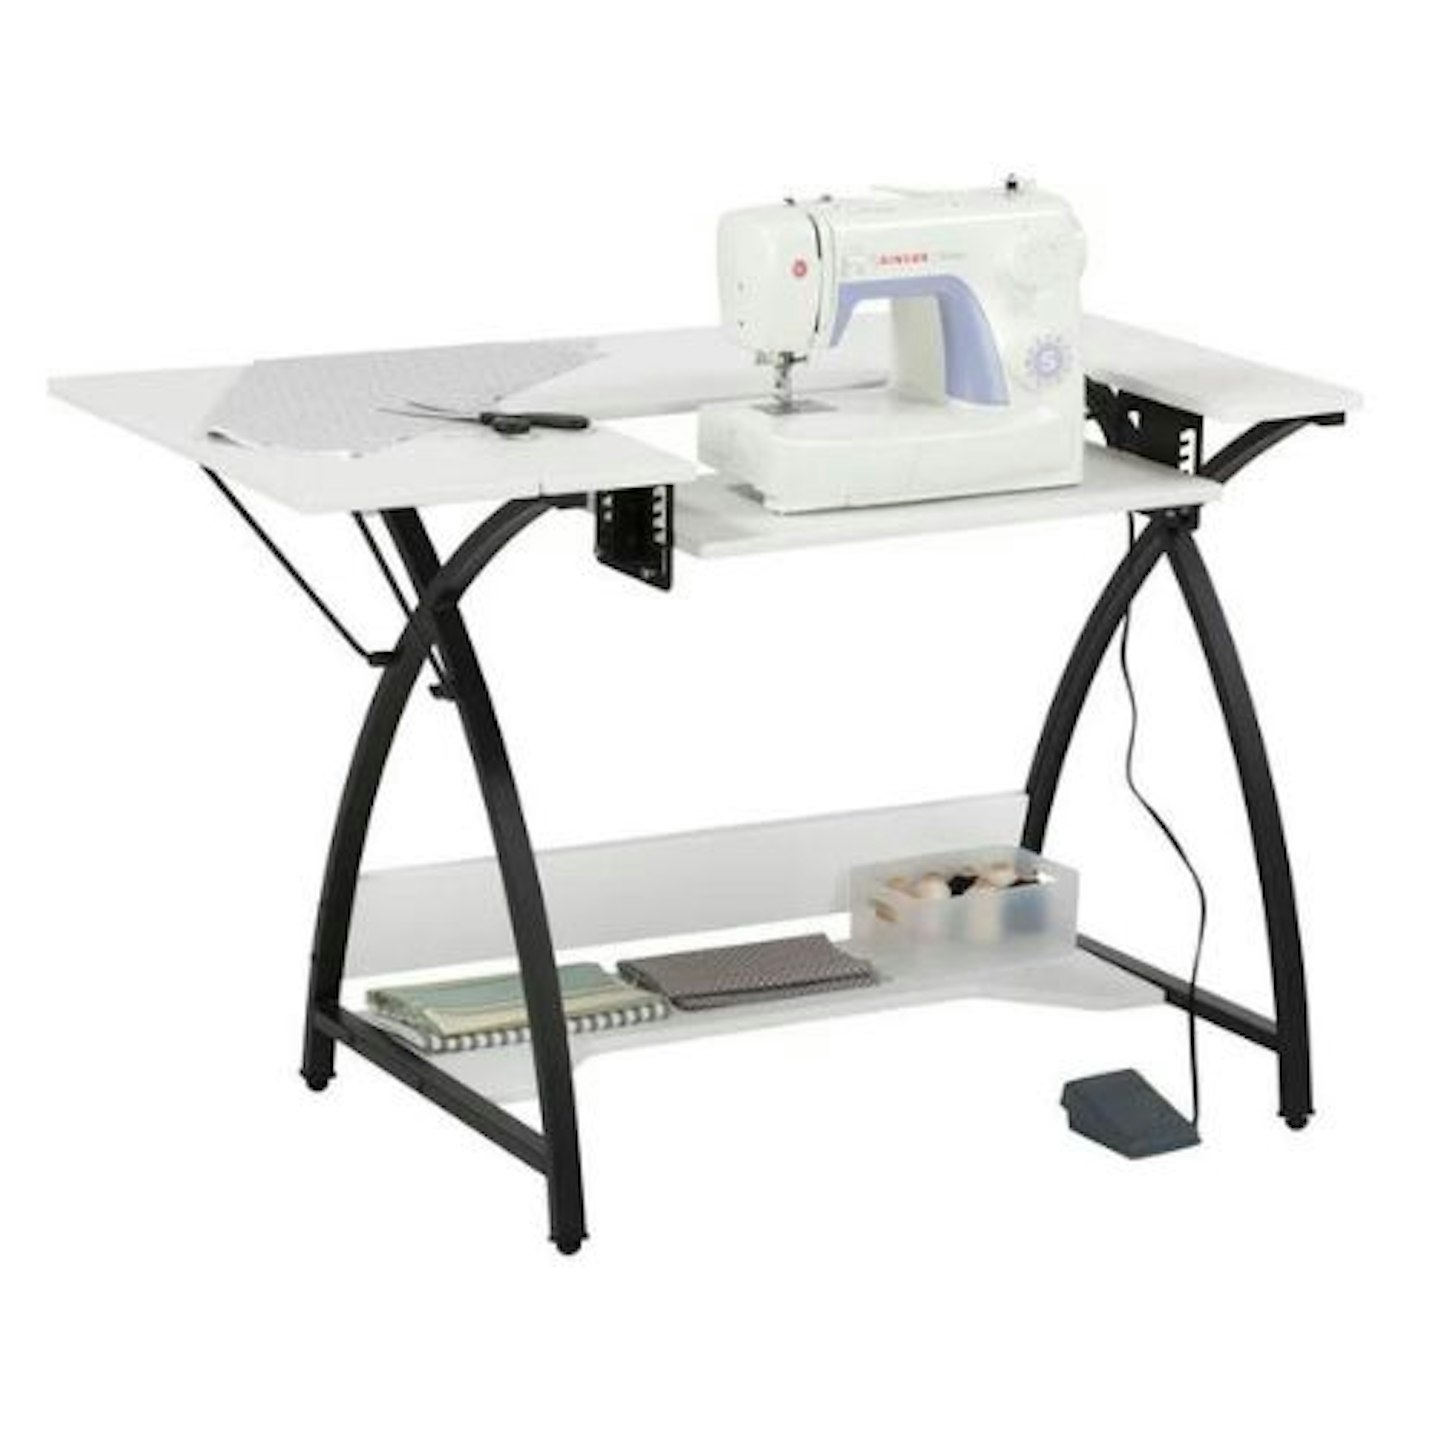 Yarbro 74.6cm x 38.5cm Foldable Sewing Table